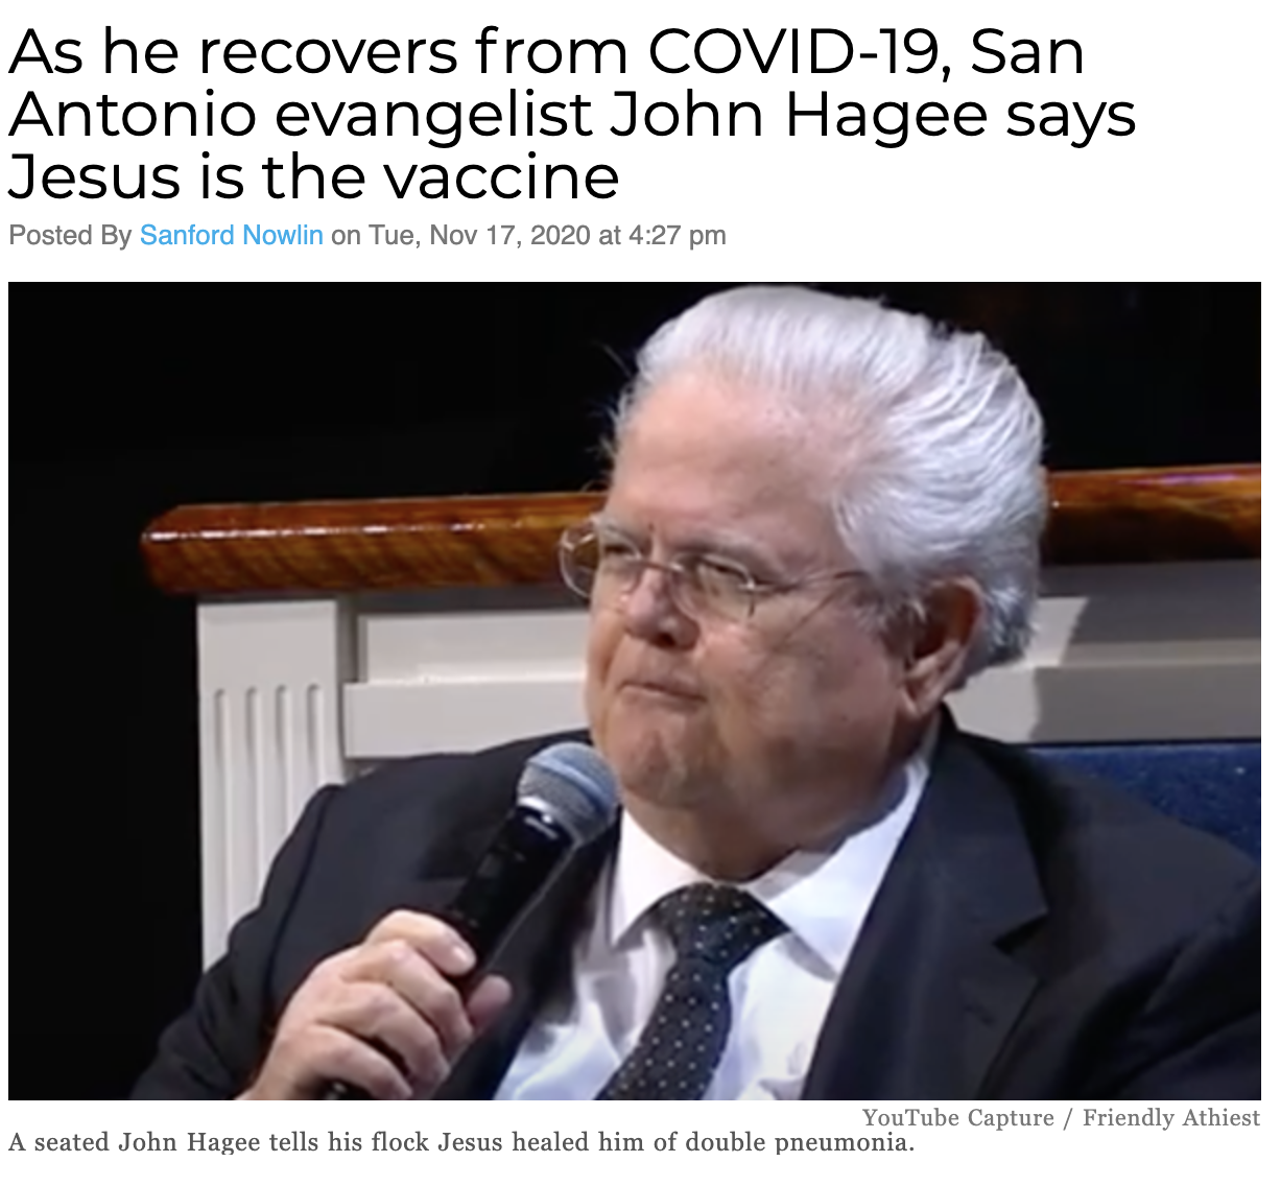 After he sufficiently recovered to return to his evangelical Cornerstone Church, pastor John Hagee chalked up his recovery to Jesus, not medical intervention. Read more here.